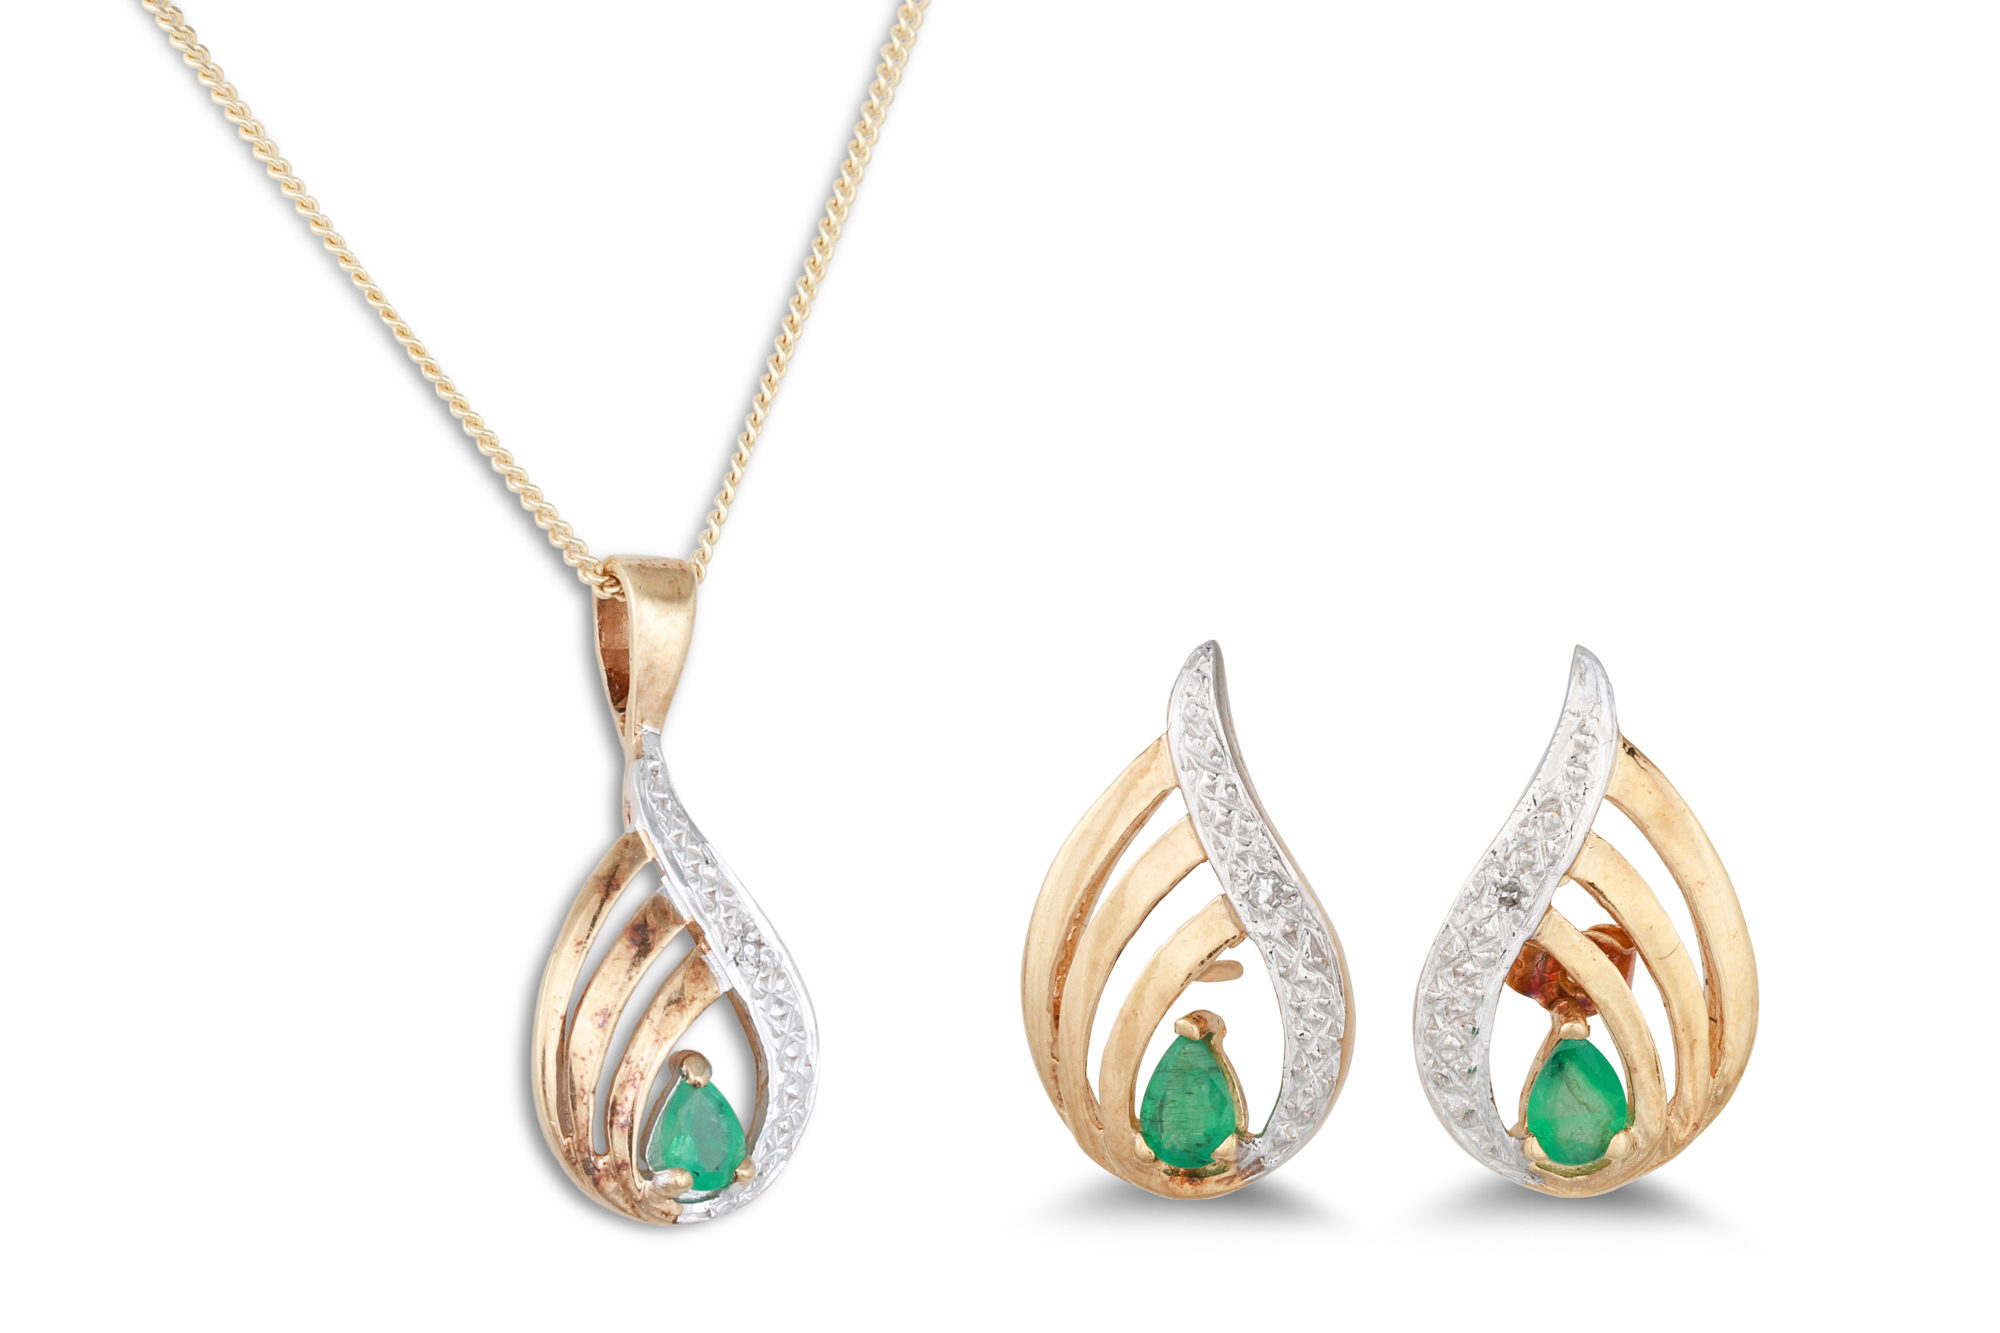 AN EMERALD AND DIAMOND CLUSTER PENDANT, pear shaped, mounted in yellow gold, on a gold chain,